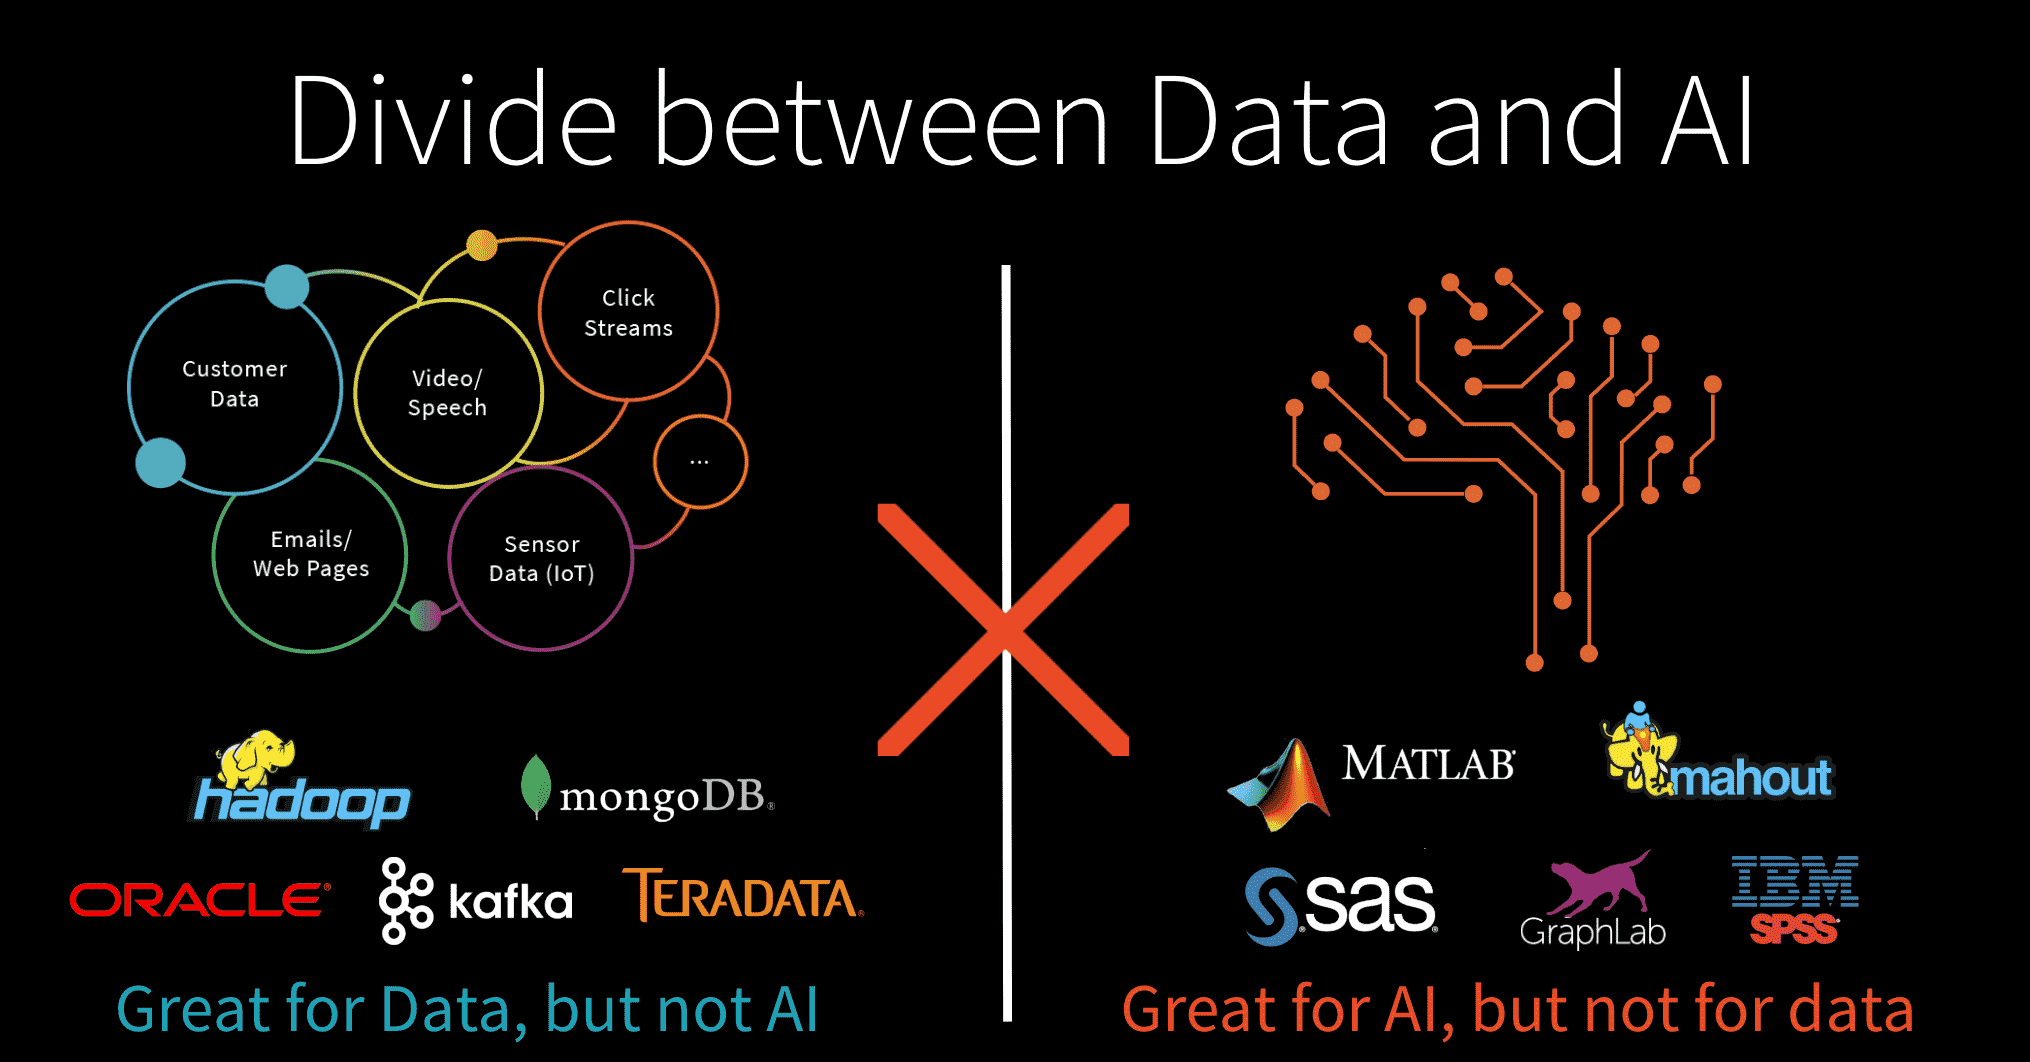 Divide between Data and AI